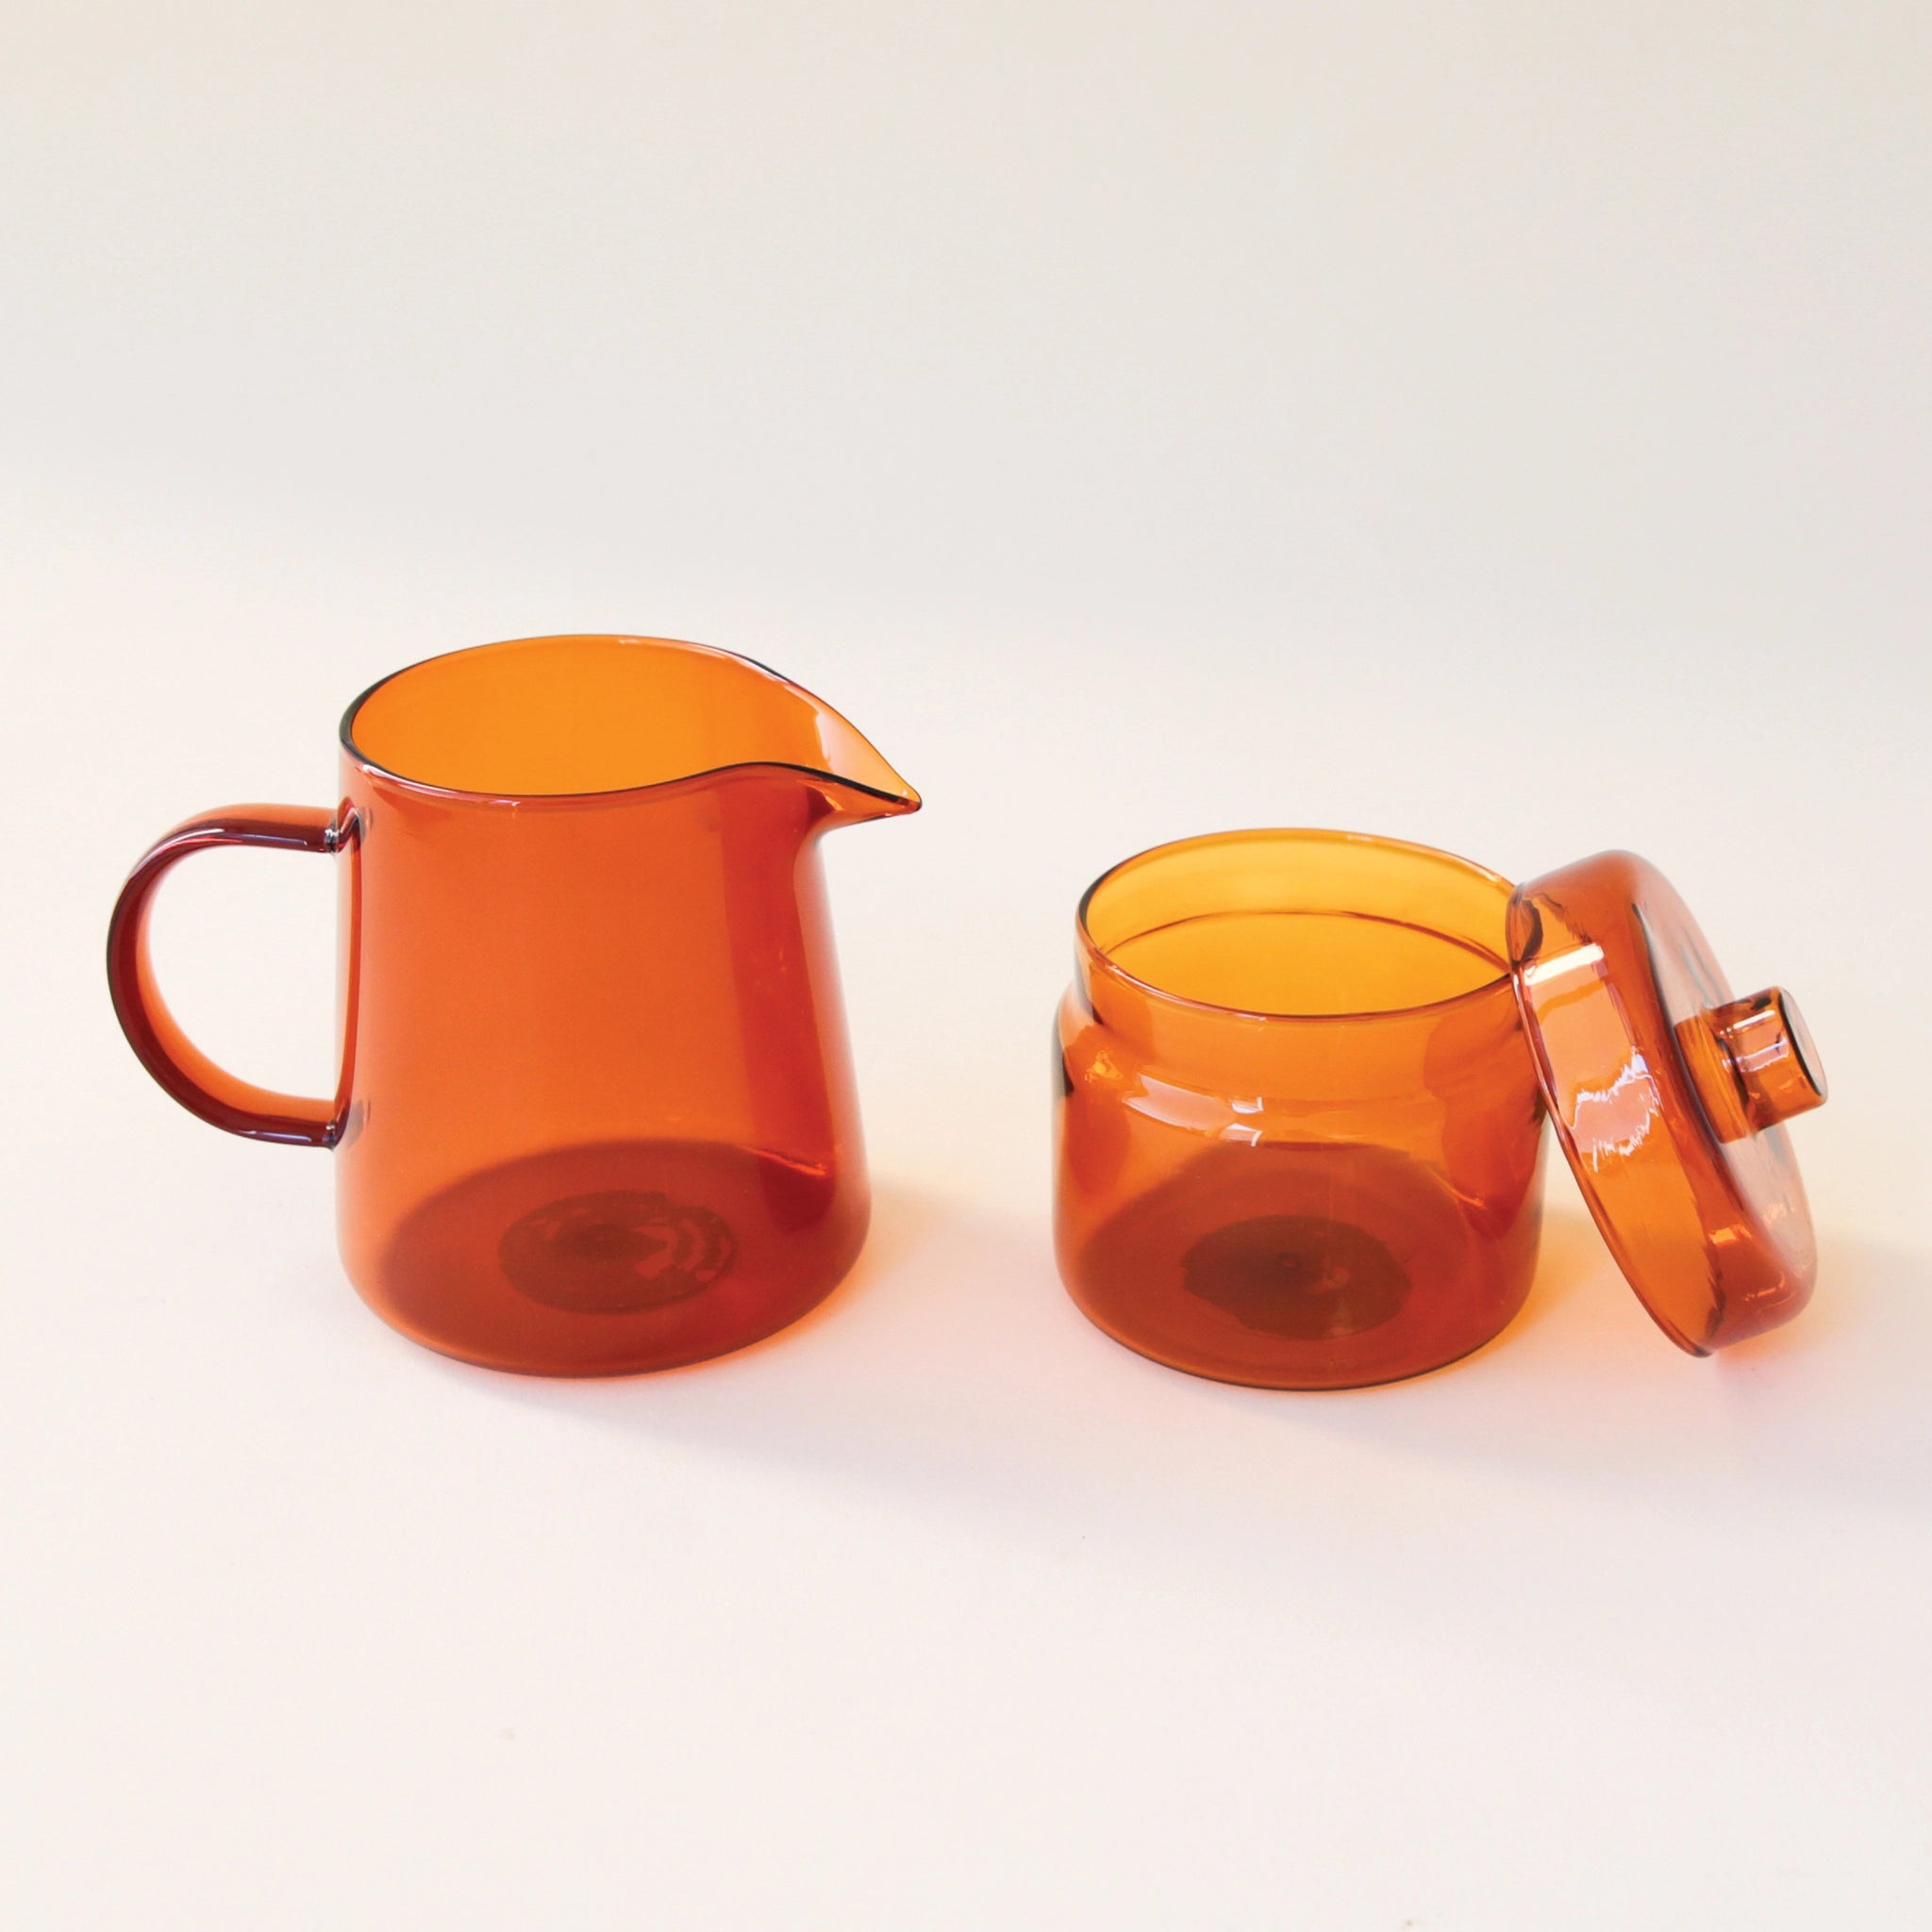 On a white background is an amber glass pitcher and sugar jar. 